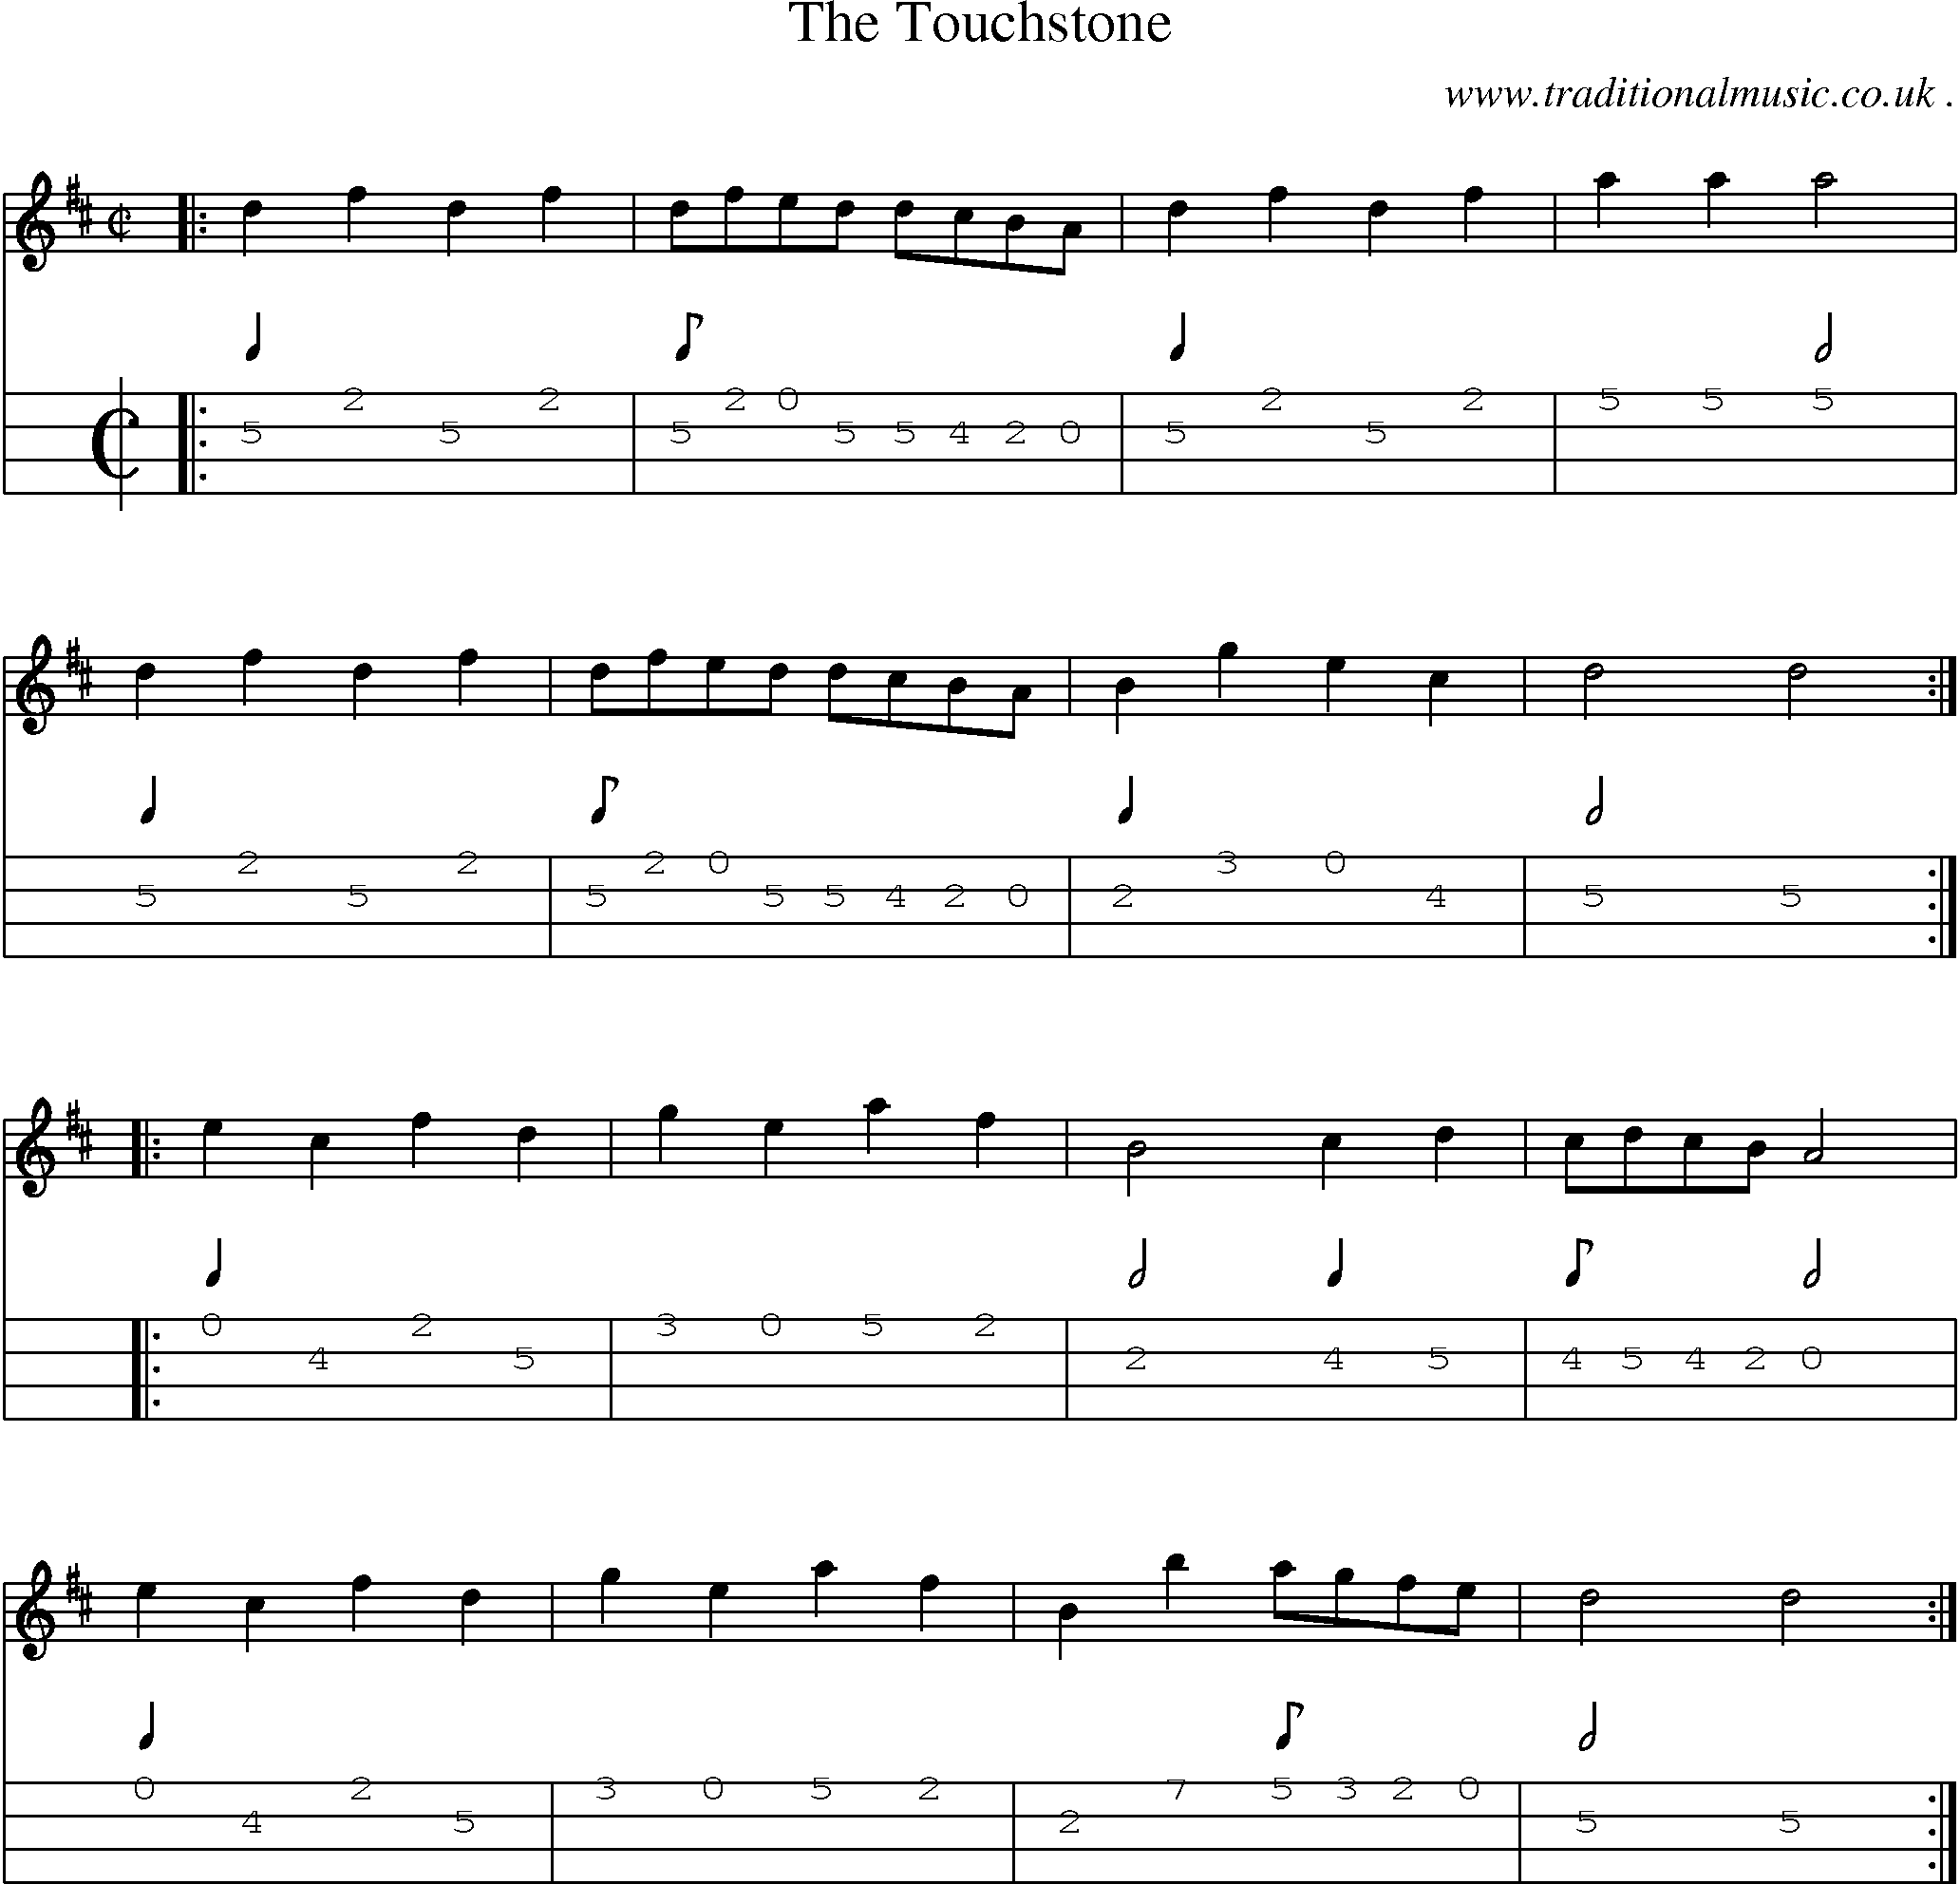 Music Score and Guitar Tabs for The Touchstone